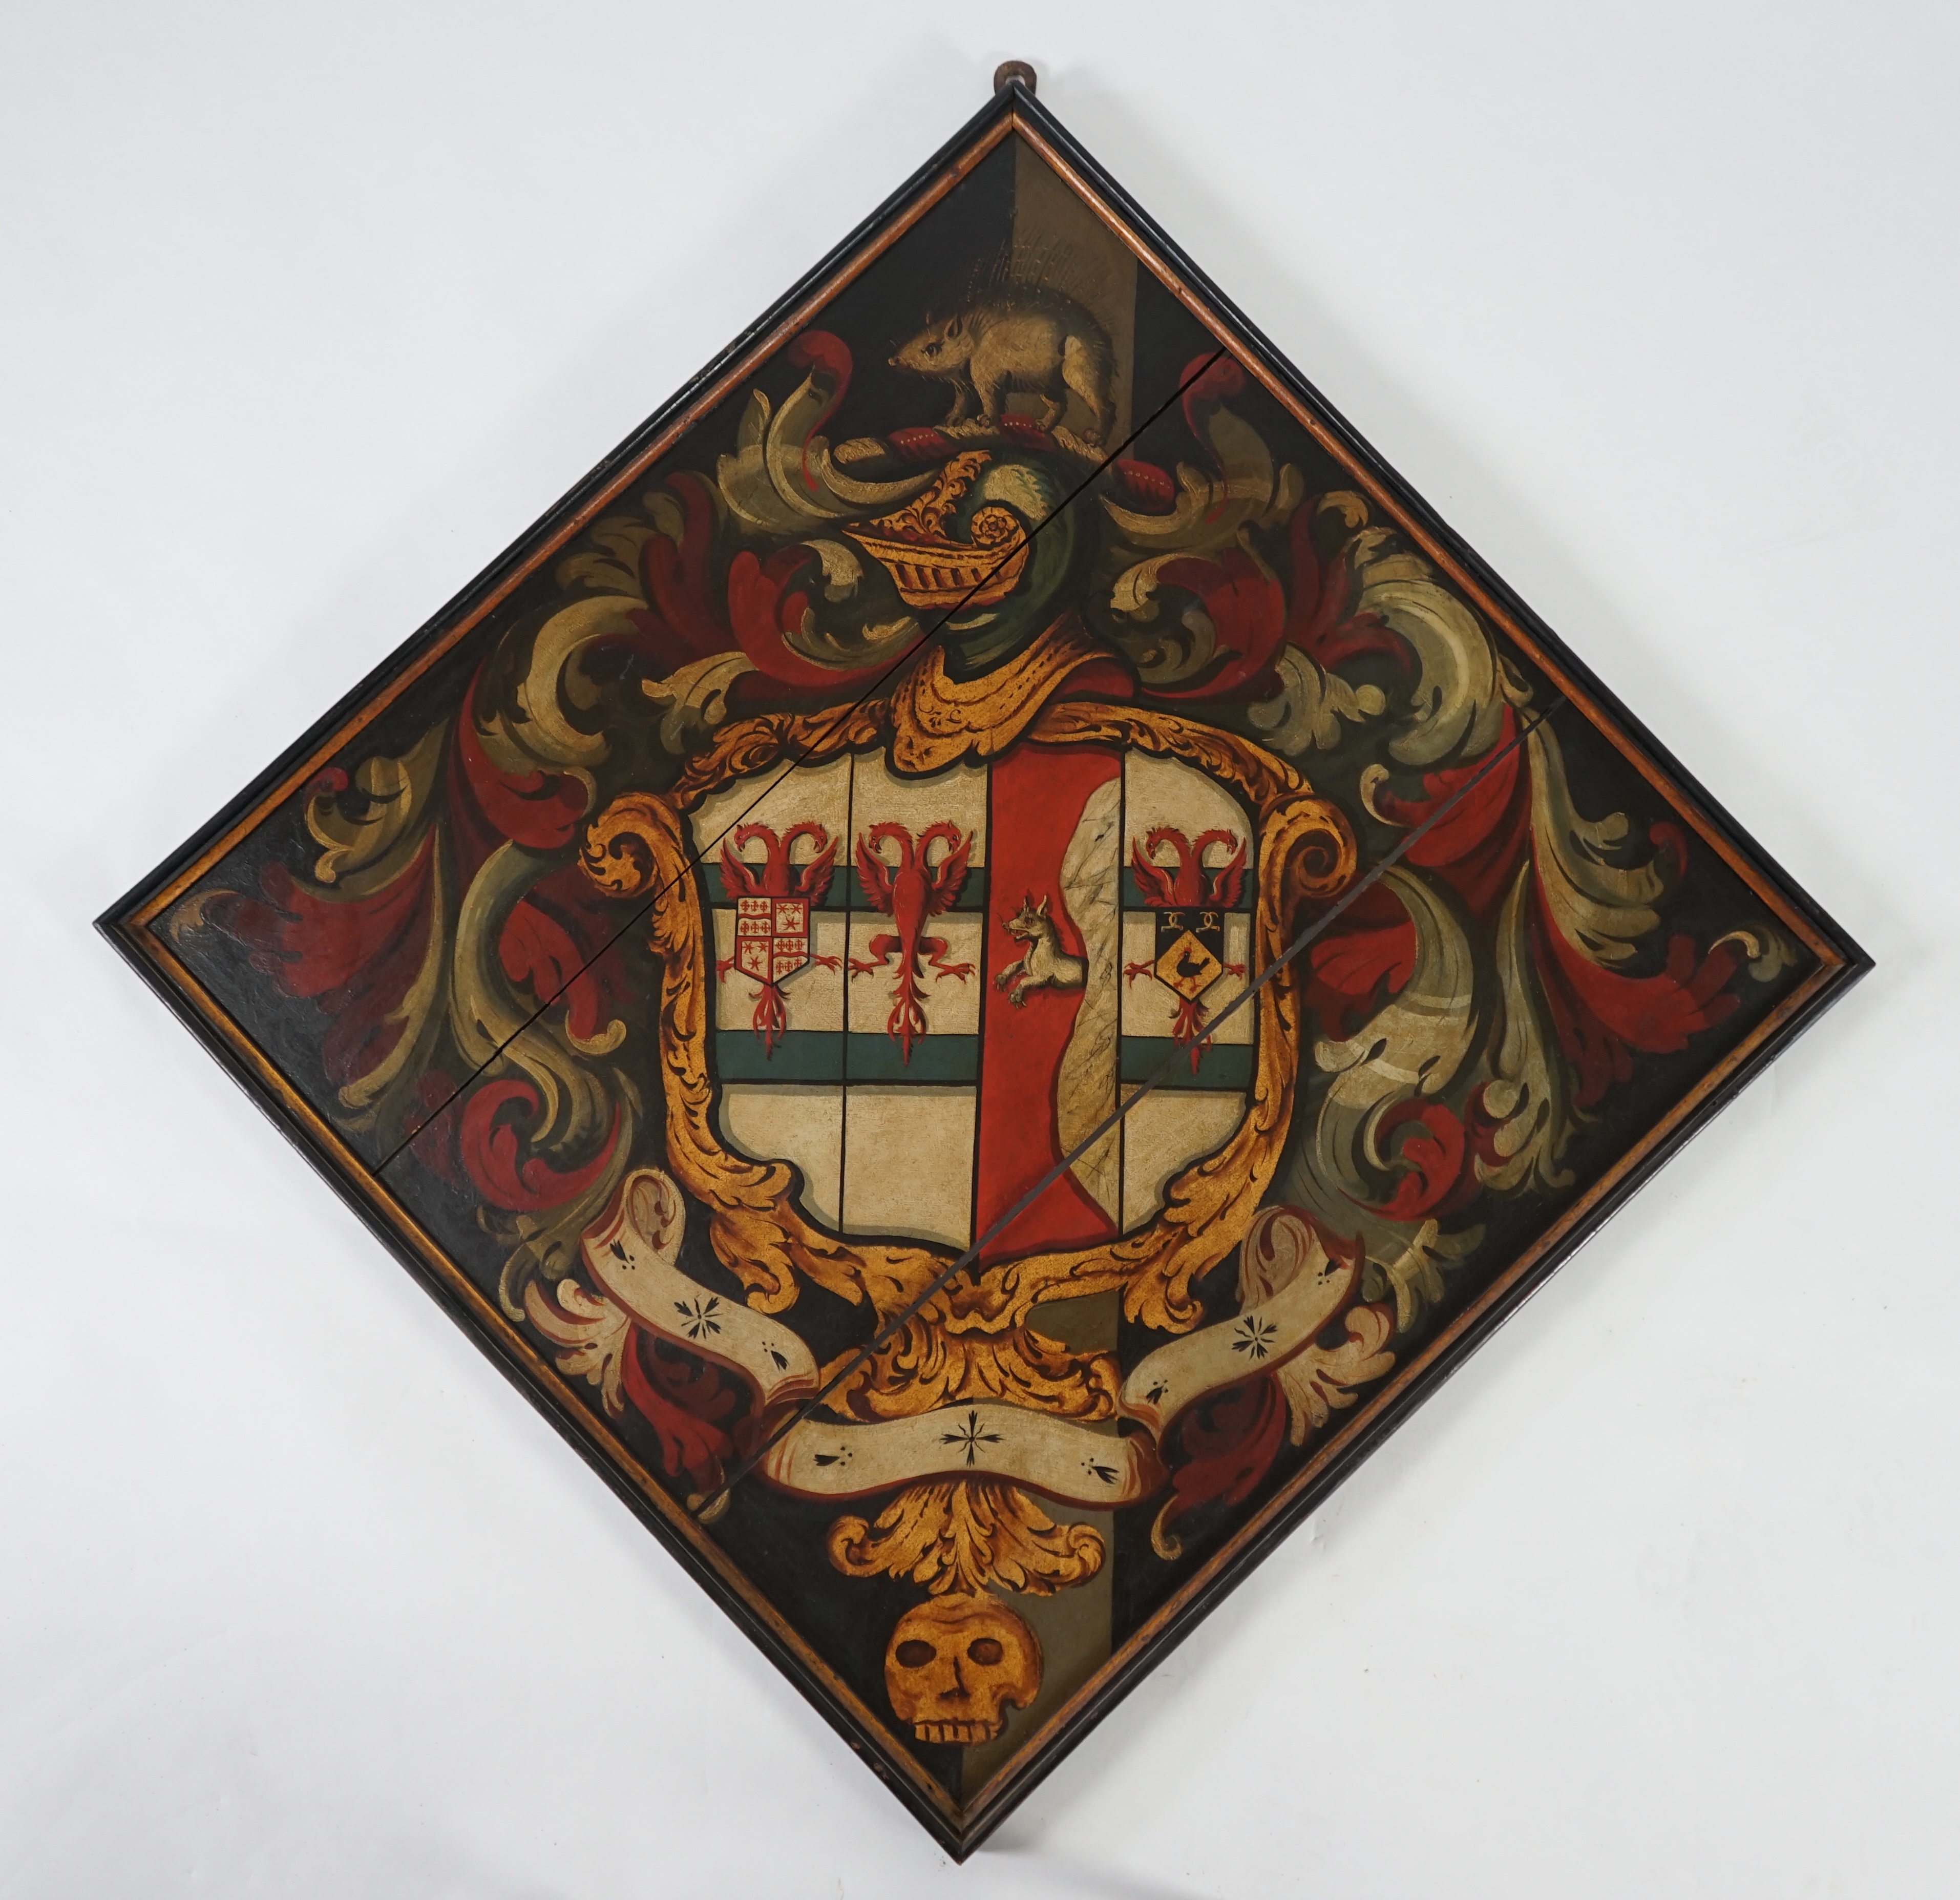 A late 18th / early 19th century oil on wooden panel hatchment